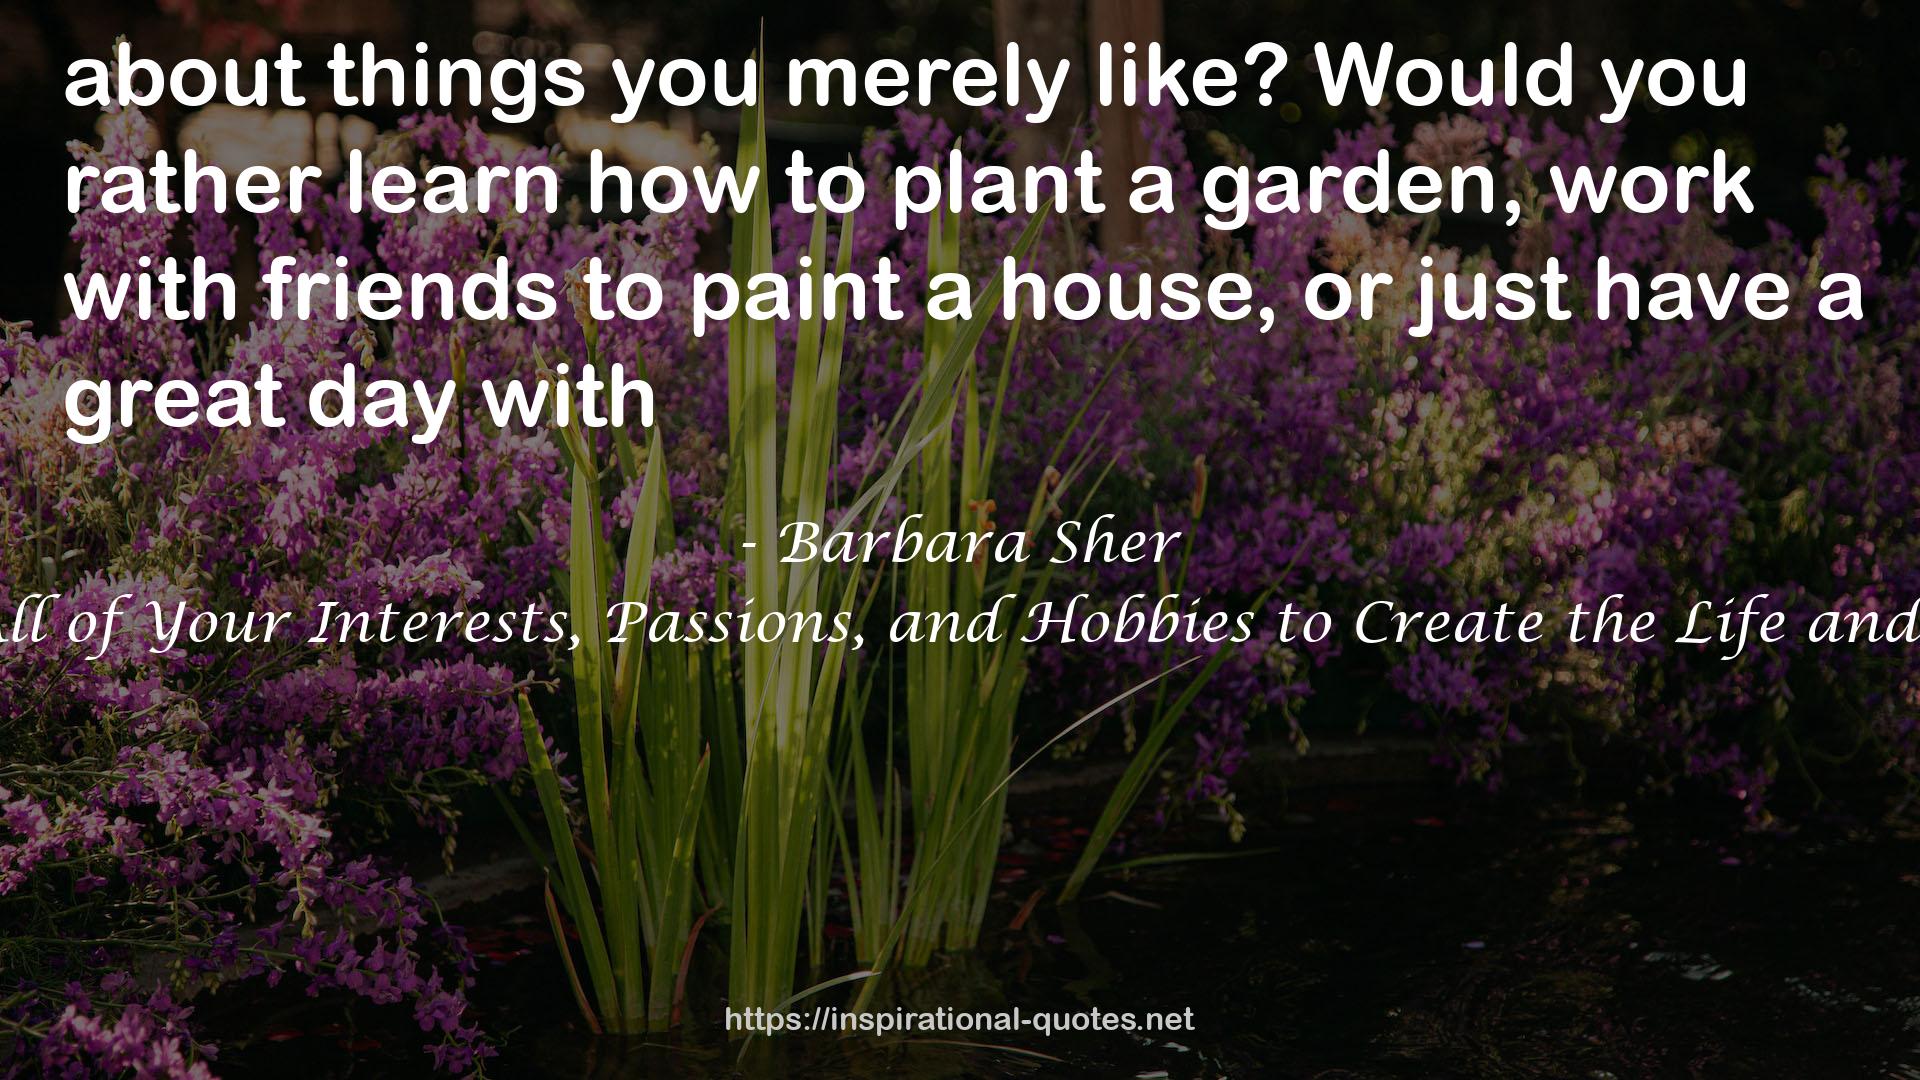 Barbara Sher QUOTES